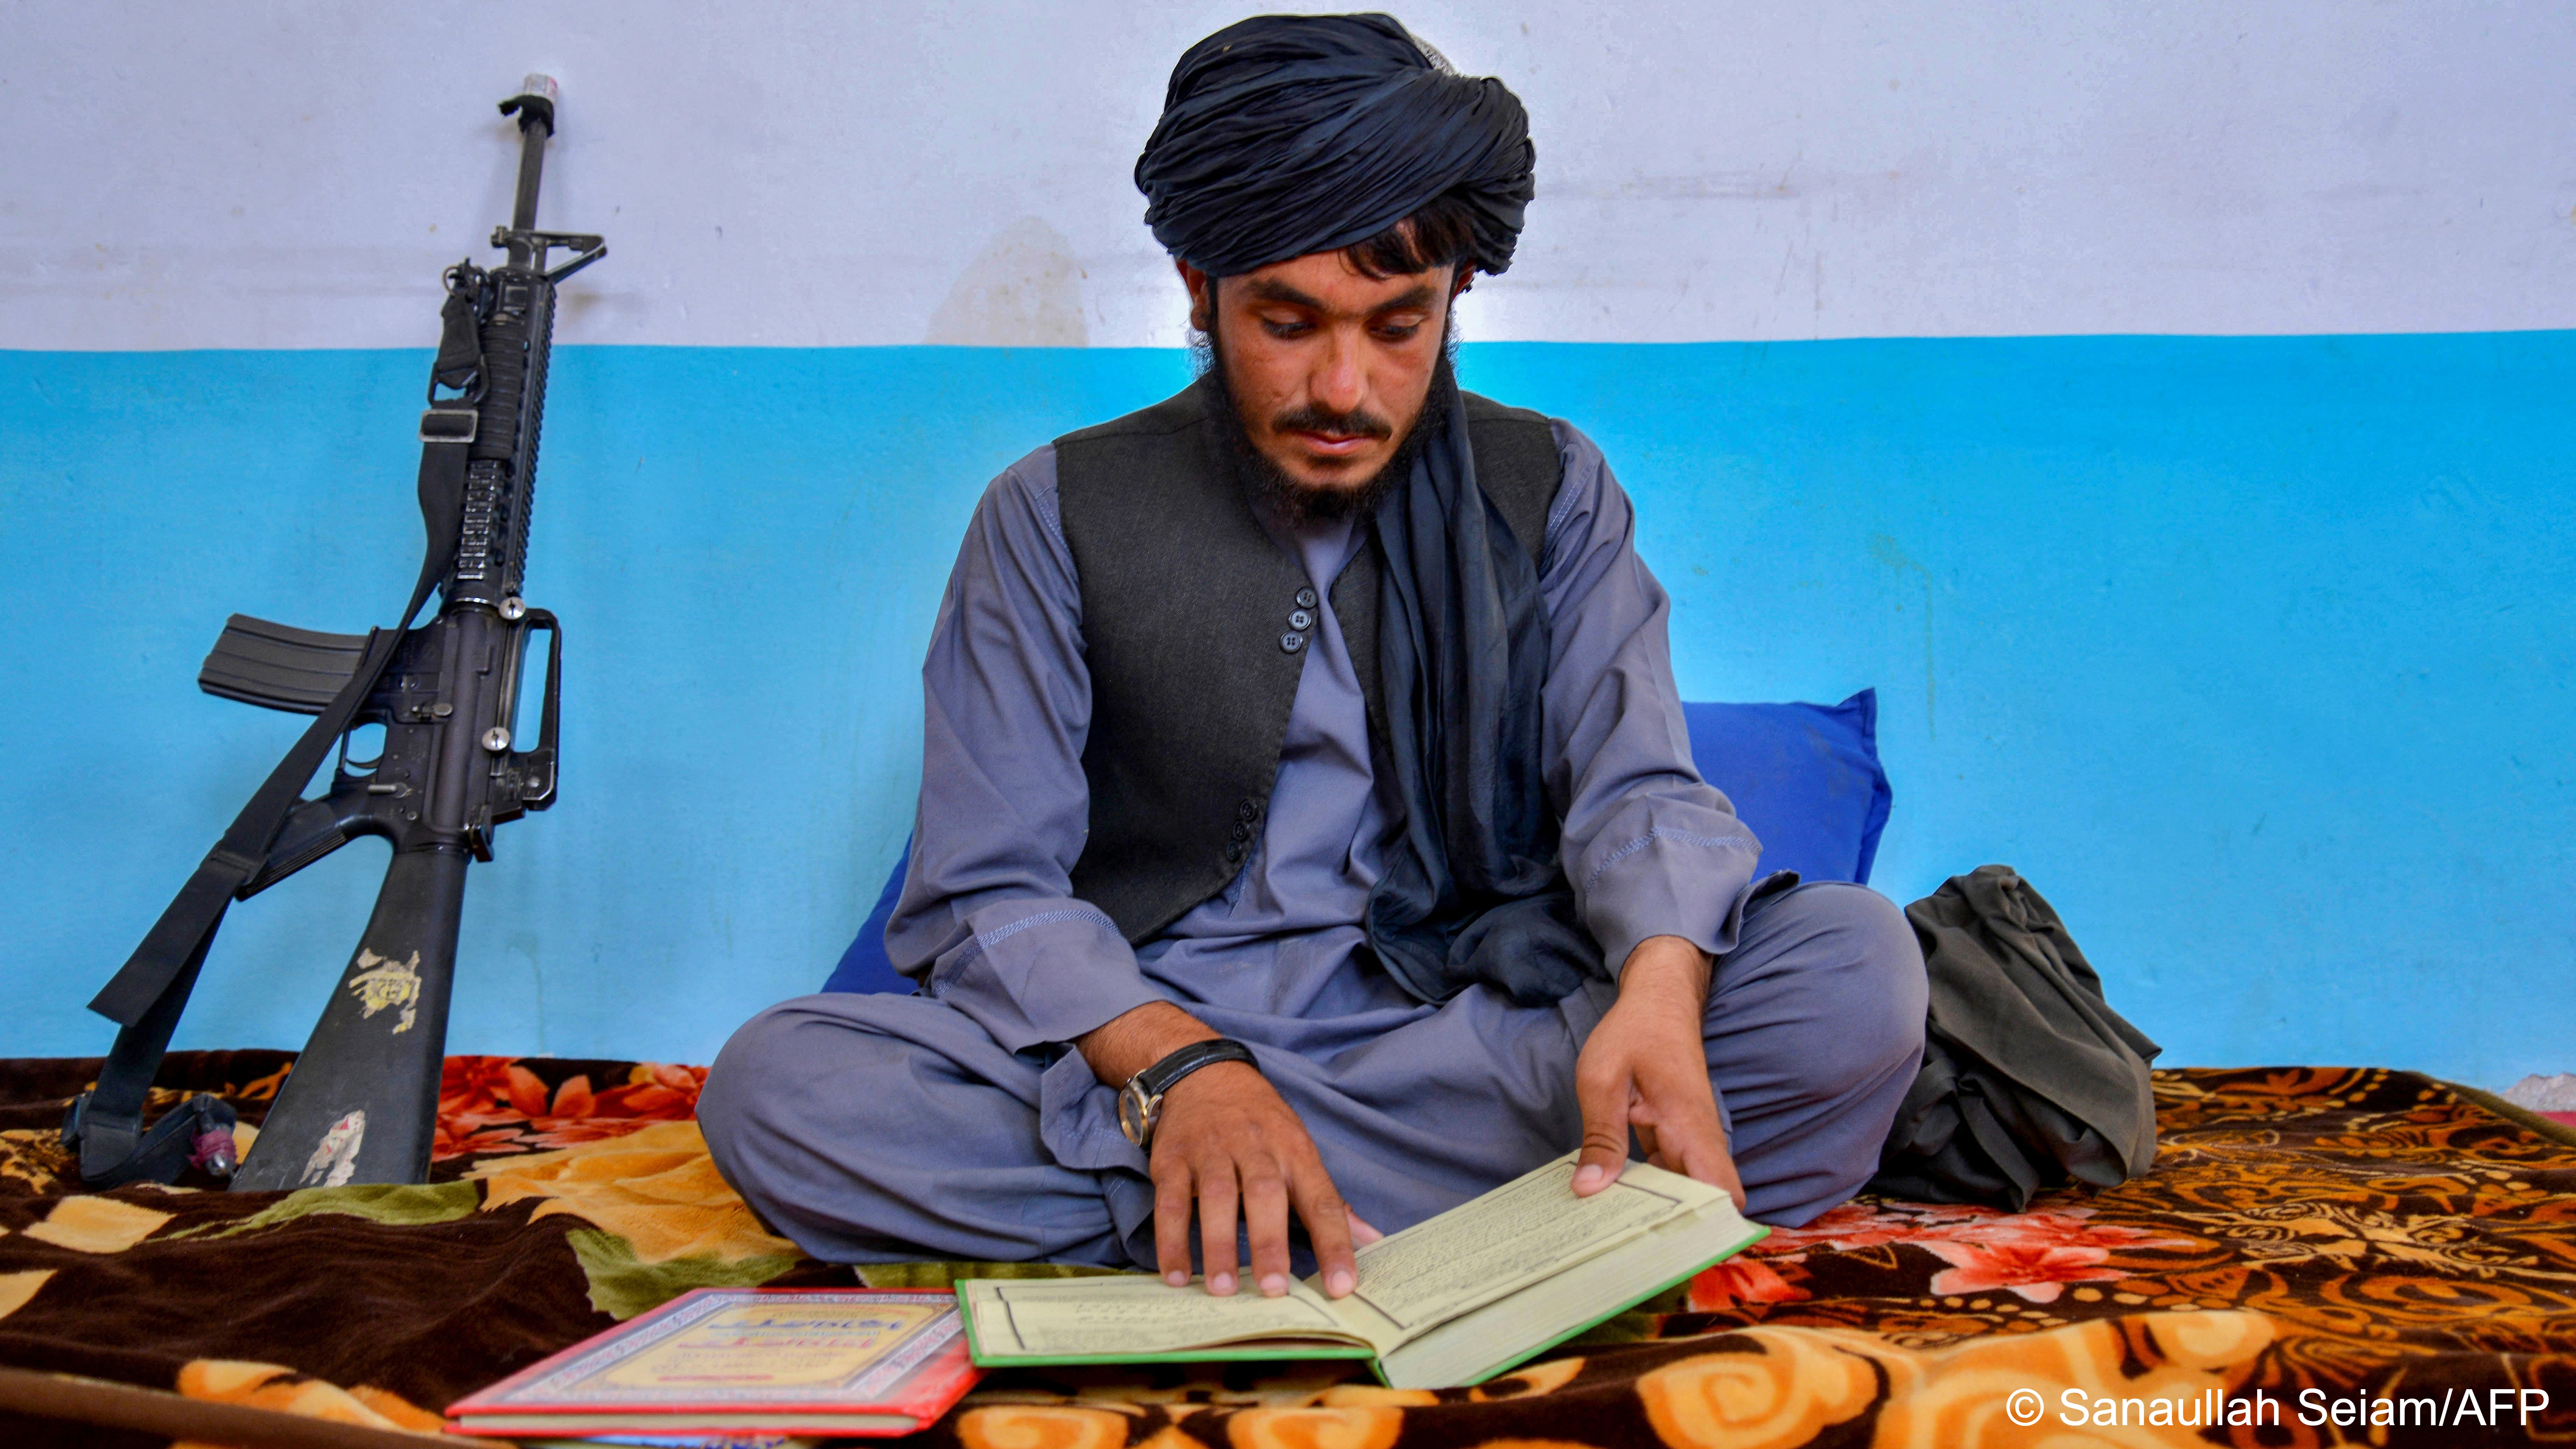 Taliban policeman Lal Muhammad reads a religious book at the police headquarters in Dand district of Kandahar province on 1 August 2023 (image: Sanaullah Seiam/AFP)